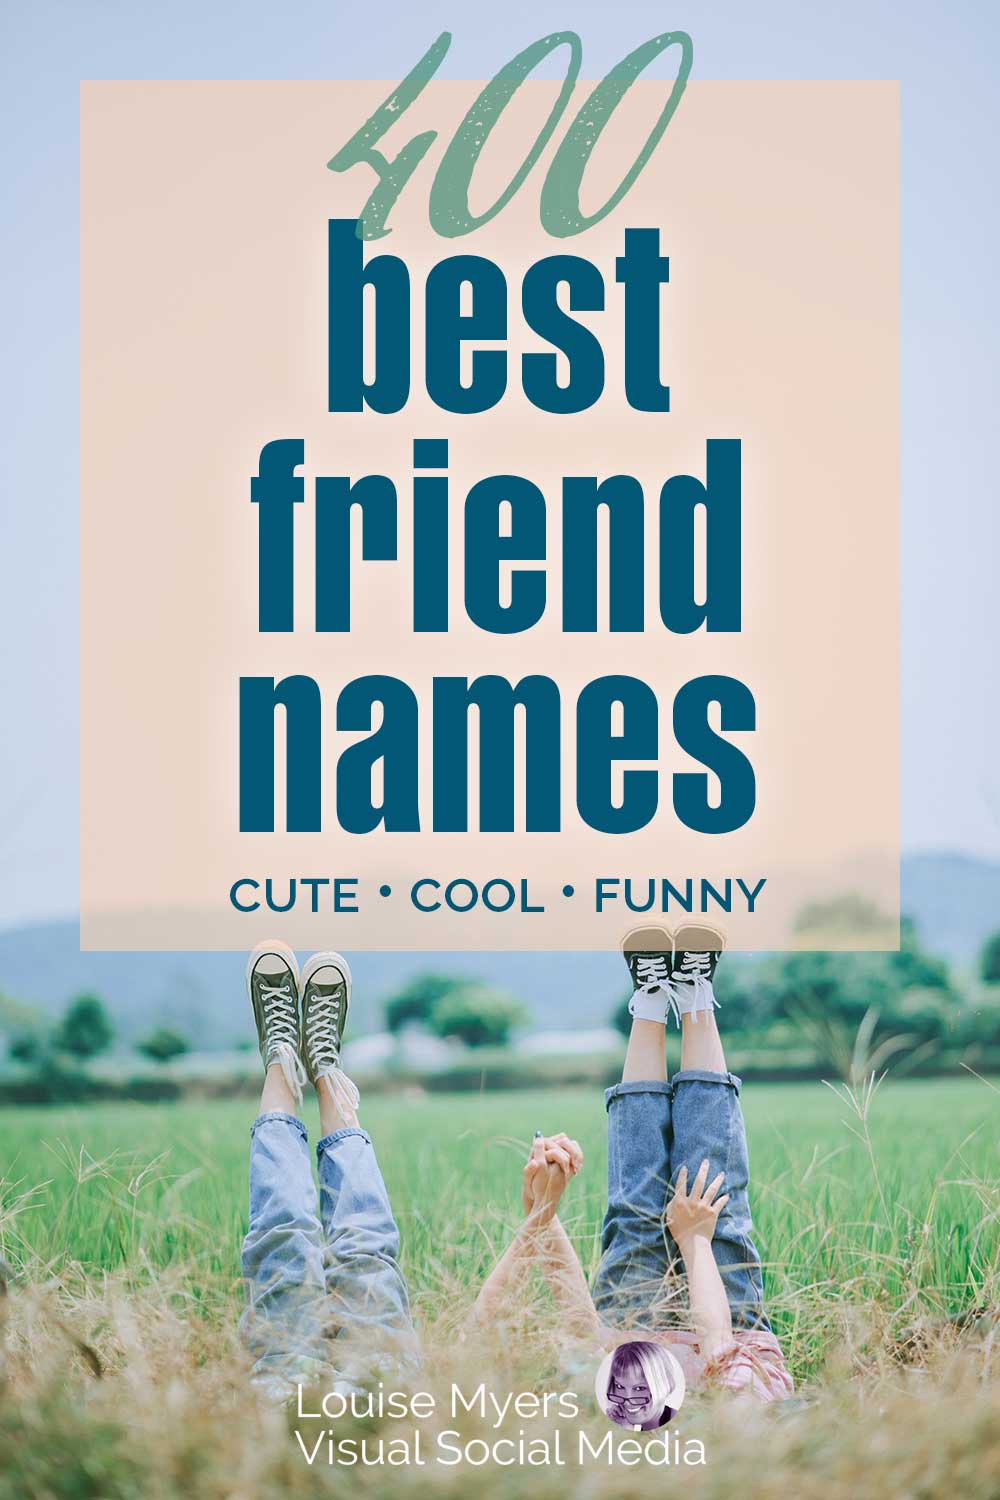 two teens lying in field with sneakers up says 400 best friend names.